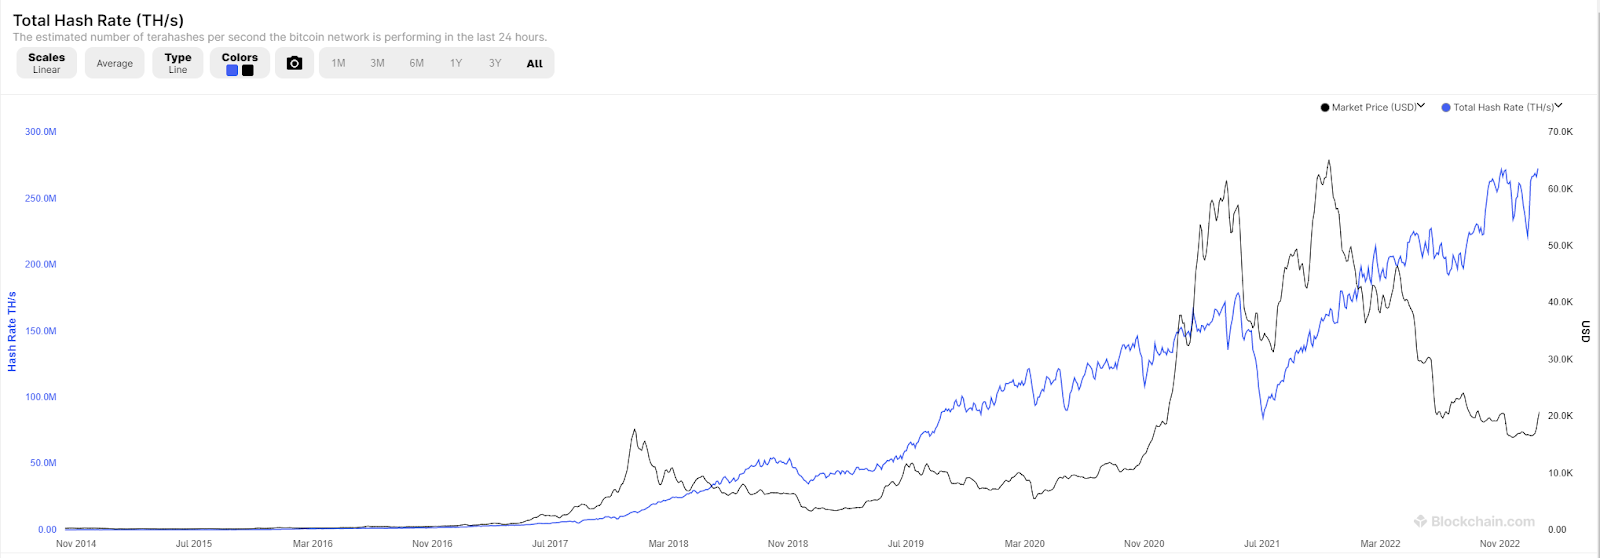 Bitcoin (BTC) Total Hash Rate and Market Price Over the Years. 